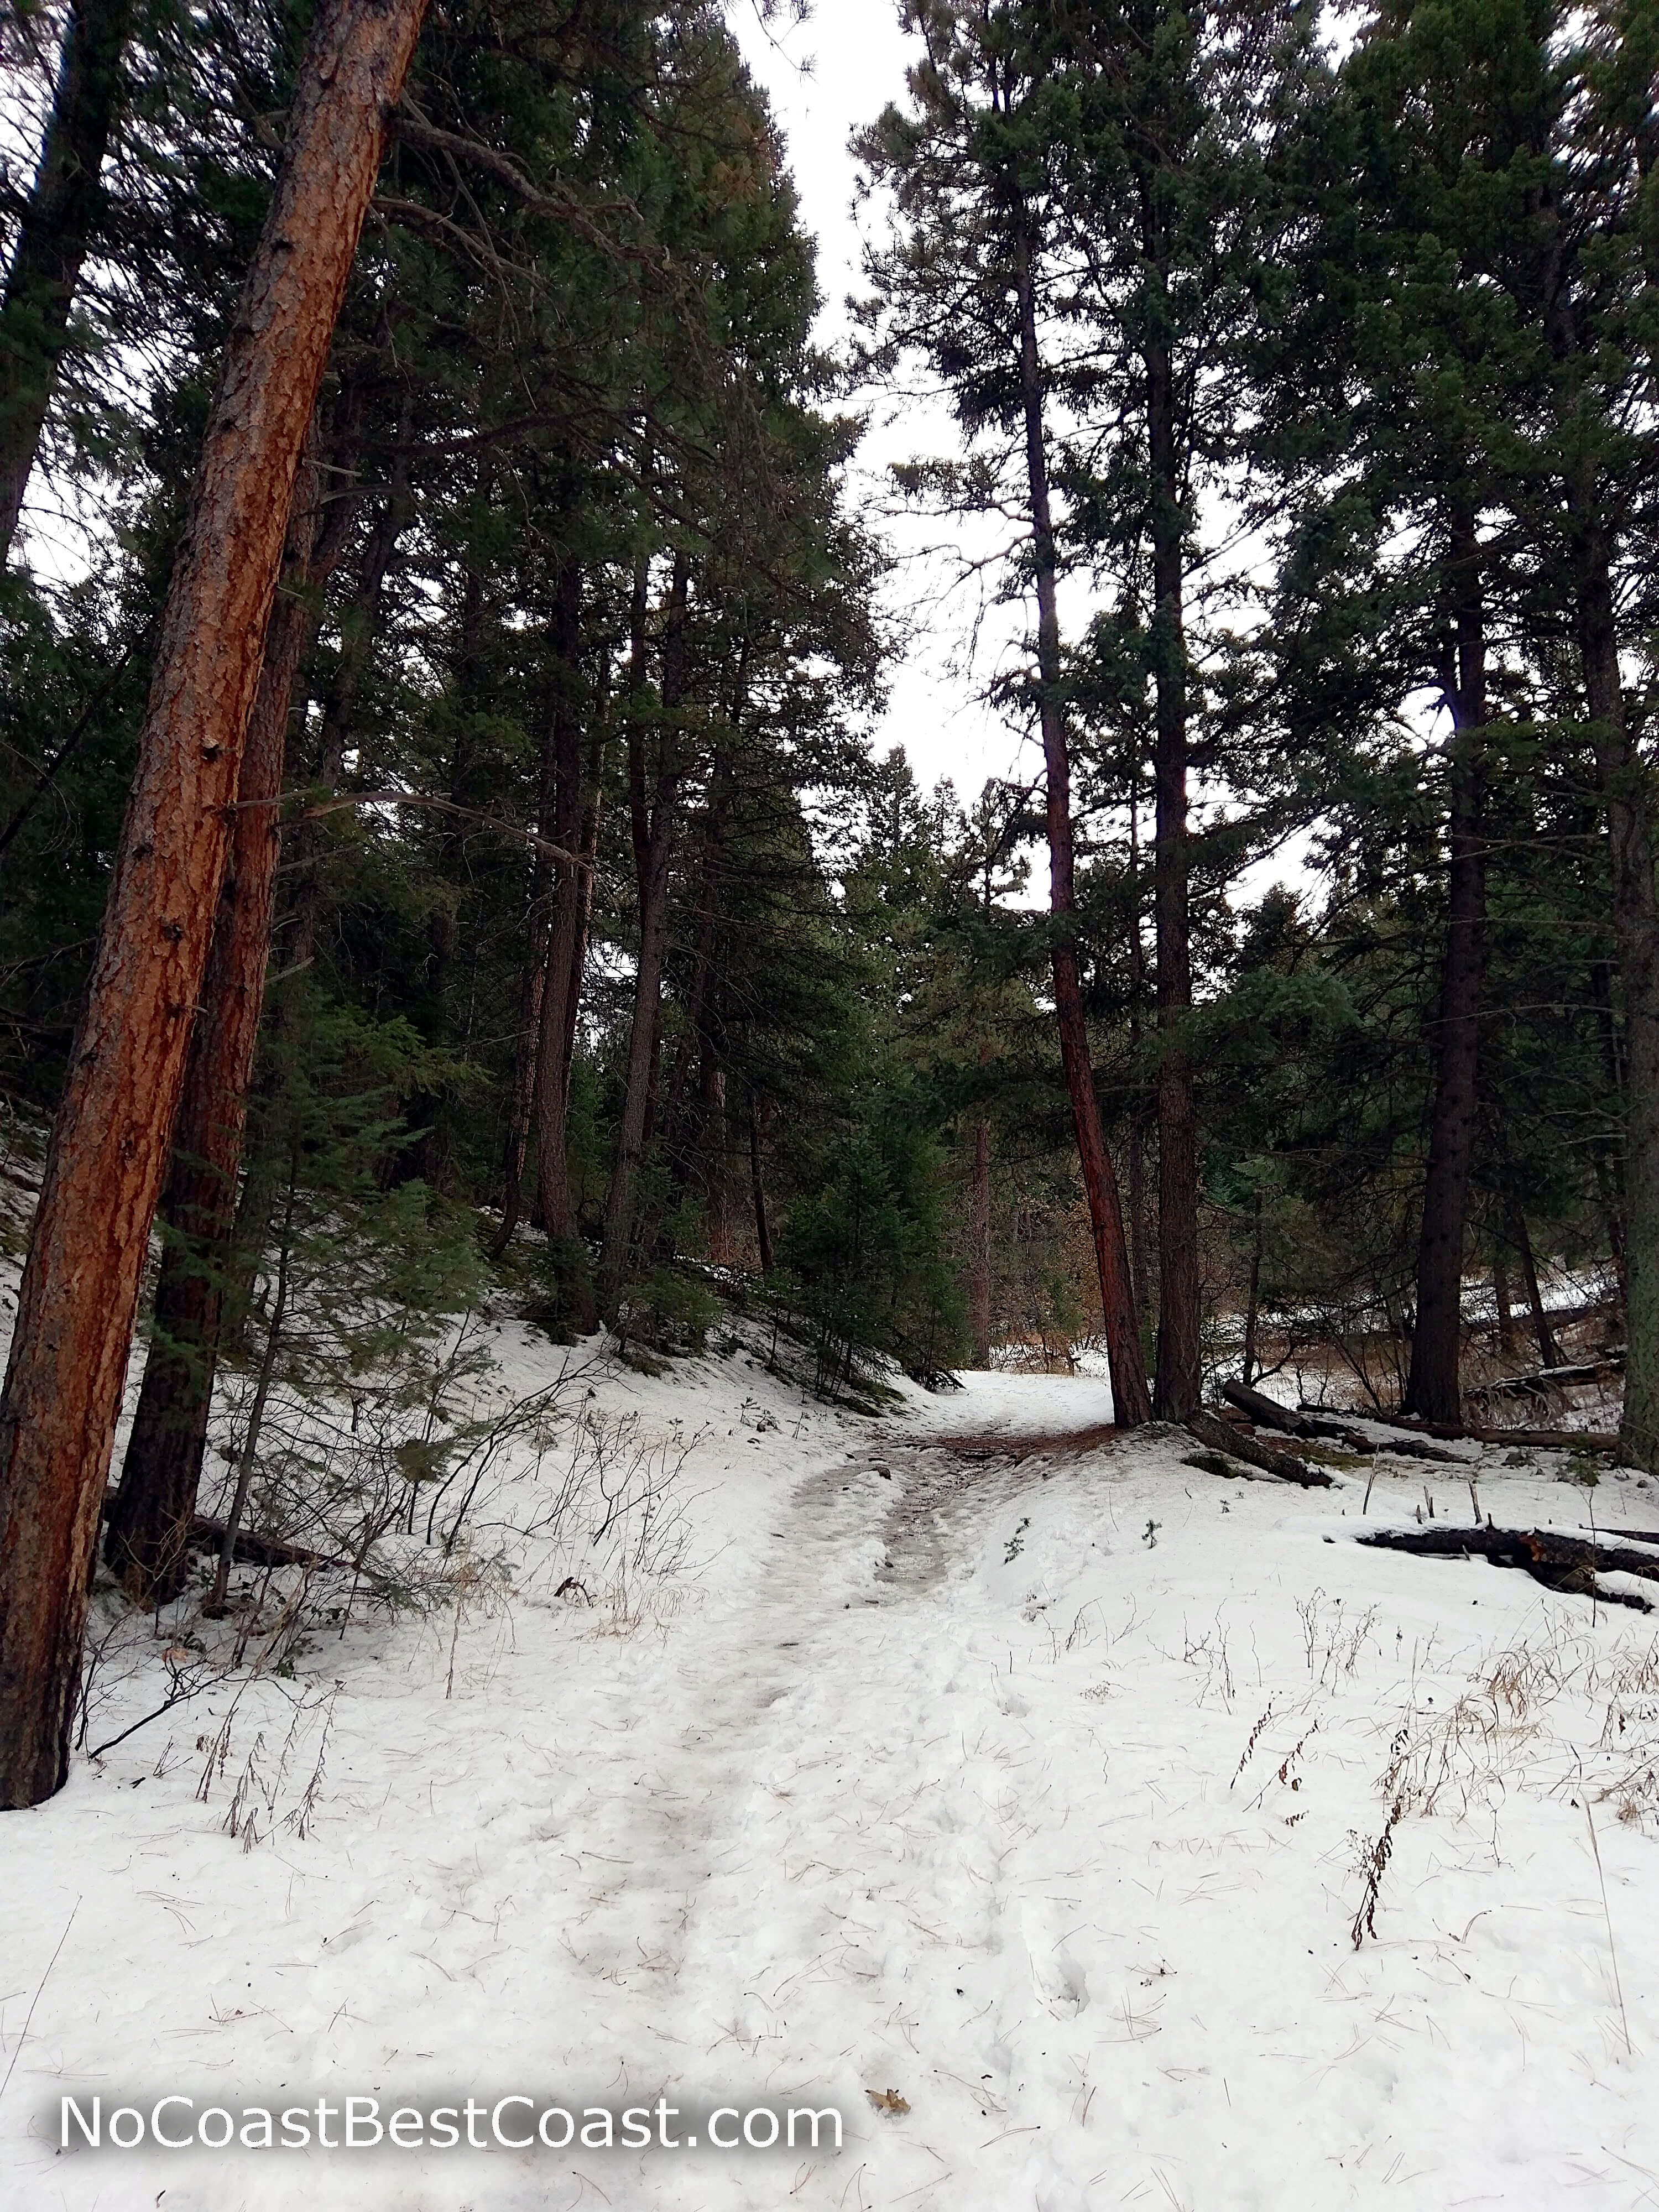 Snow blanketing the pine forest floor